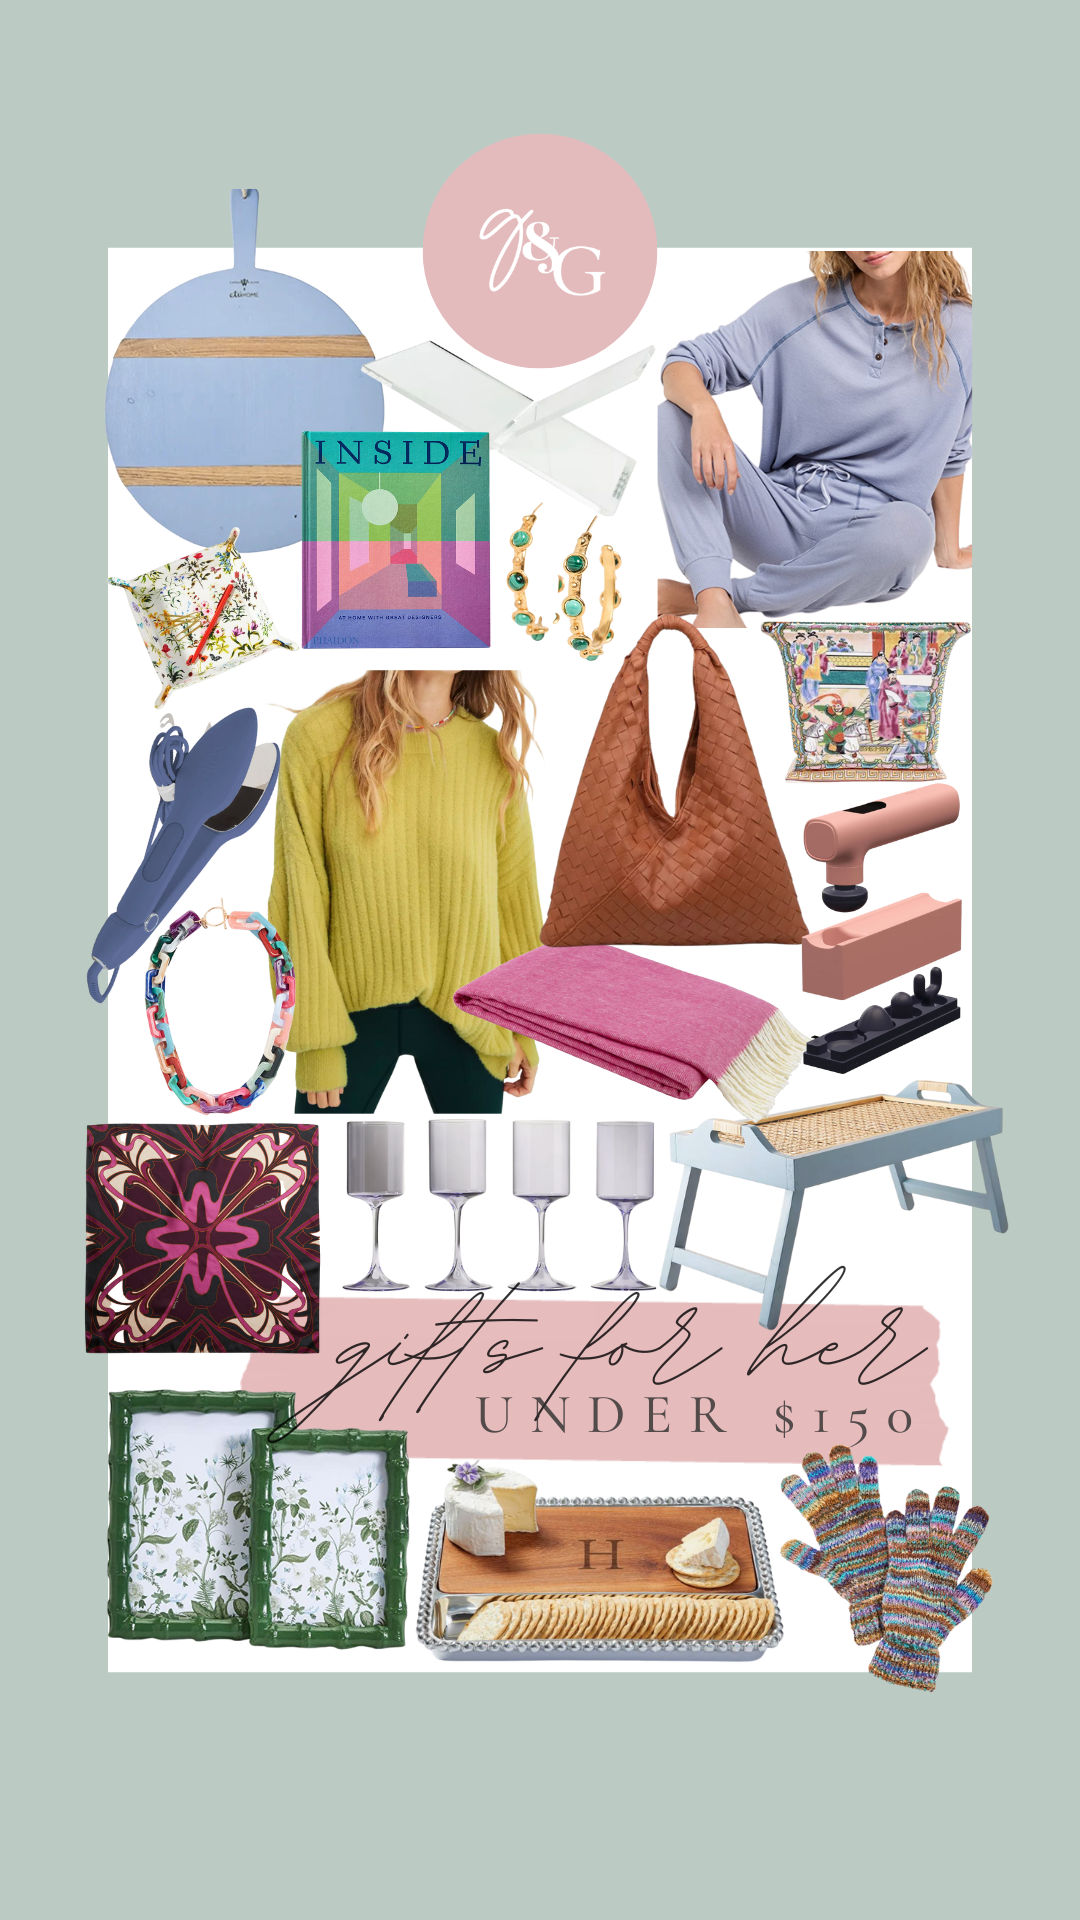 Gift Guide: Cozy Gifts for Her Under $50 - Glitter & Gingham